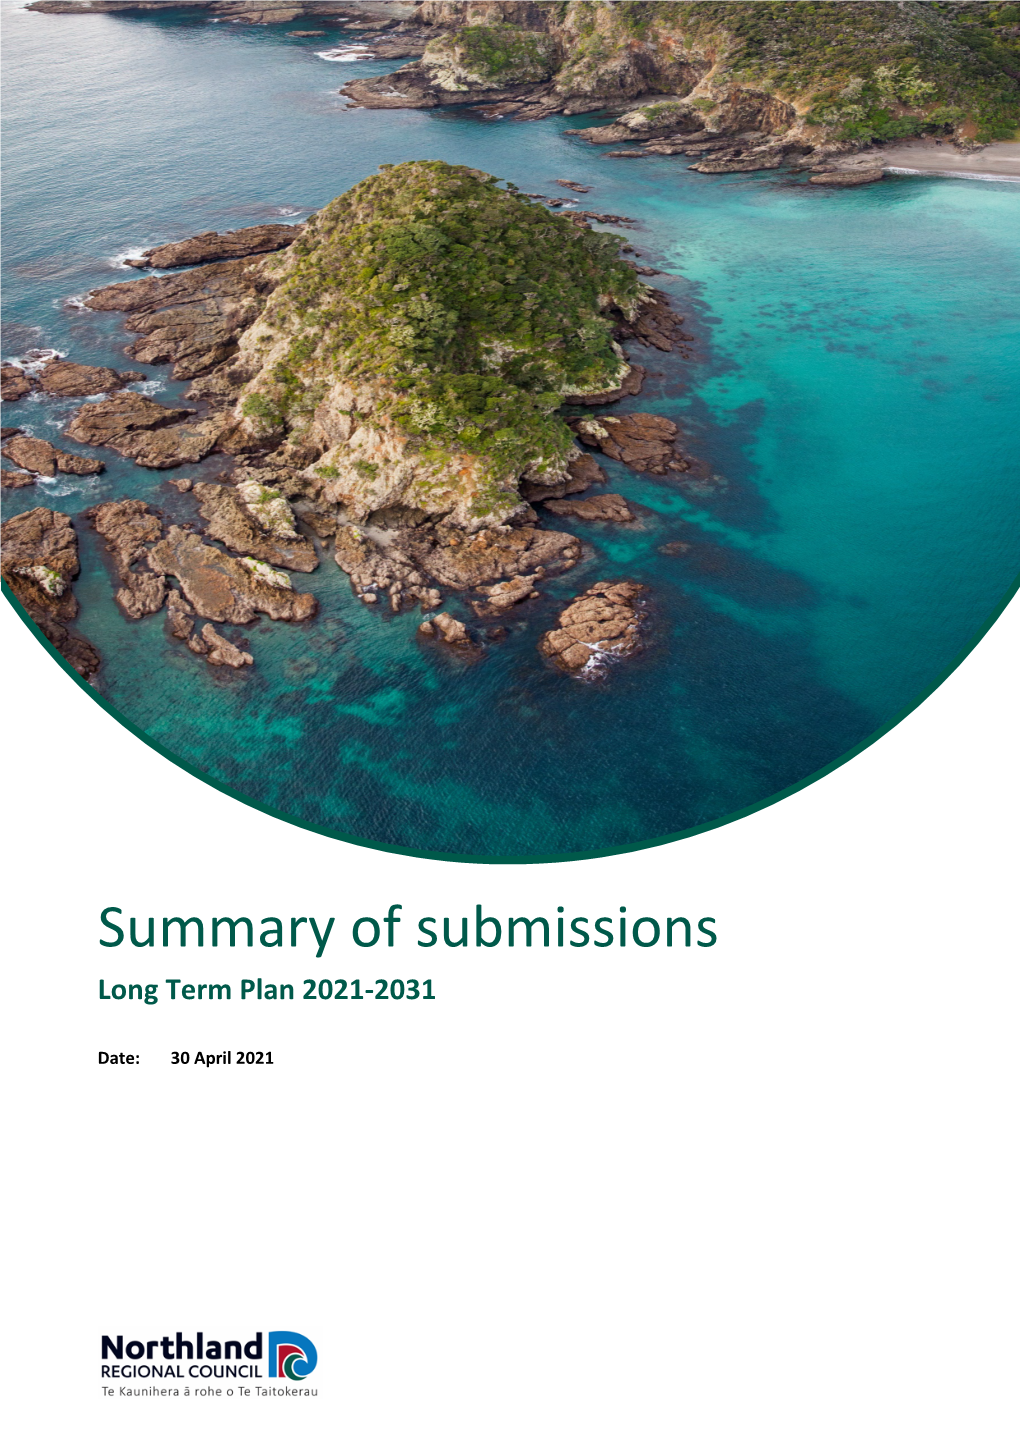 Summary of Submissions Long Term Plan 2021-2031